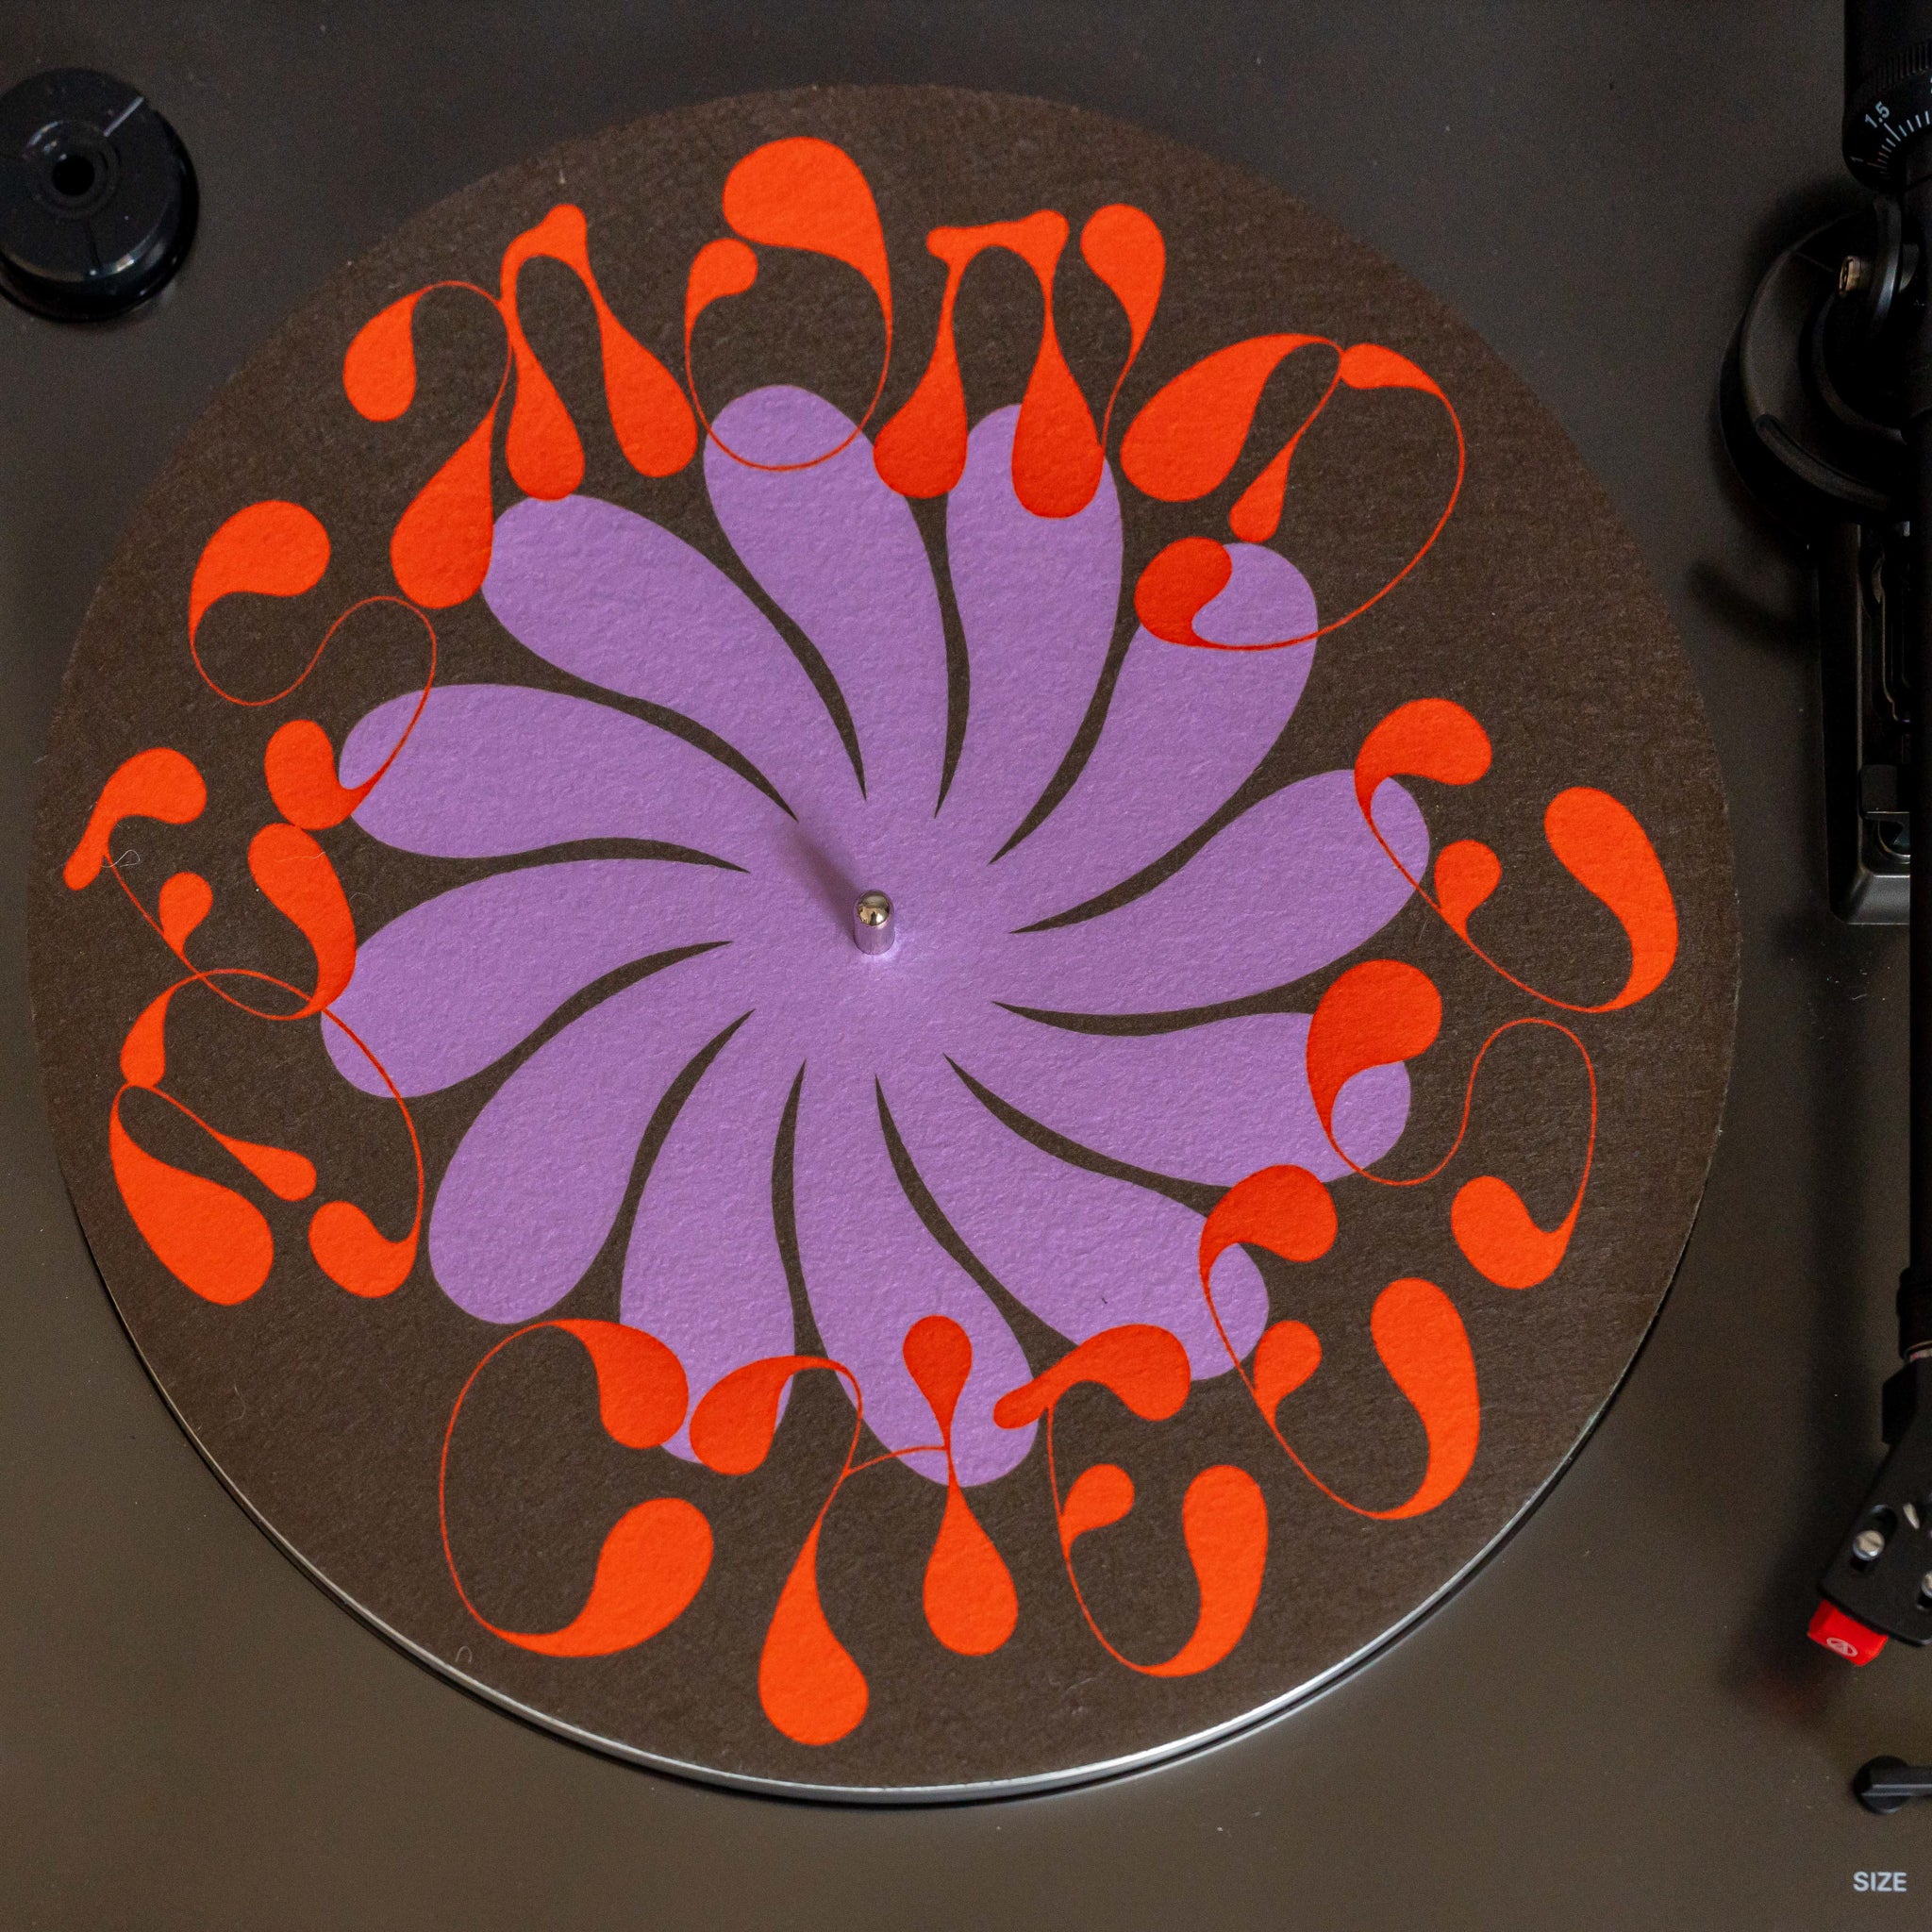 Desmond Cheese Turntable Slipmat and Stickers